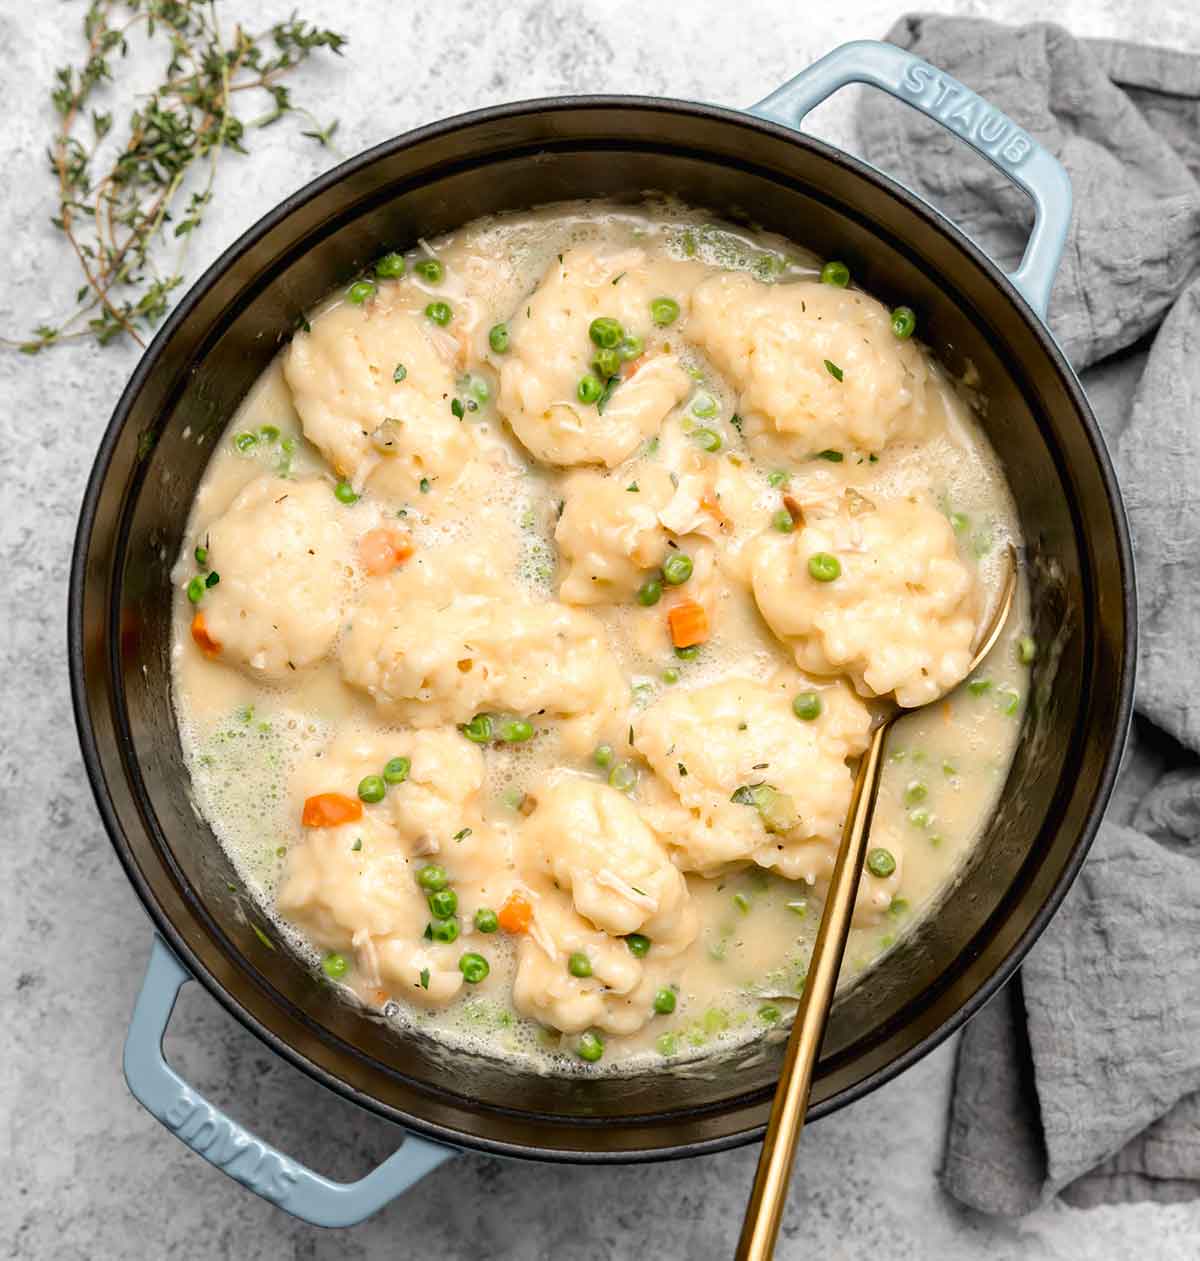 Overhead photo of pot of chicken and dumplings with a gold spoon underneath one of the dumplings.